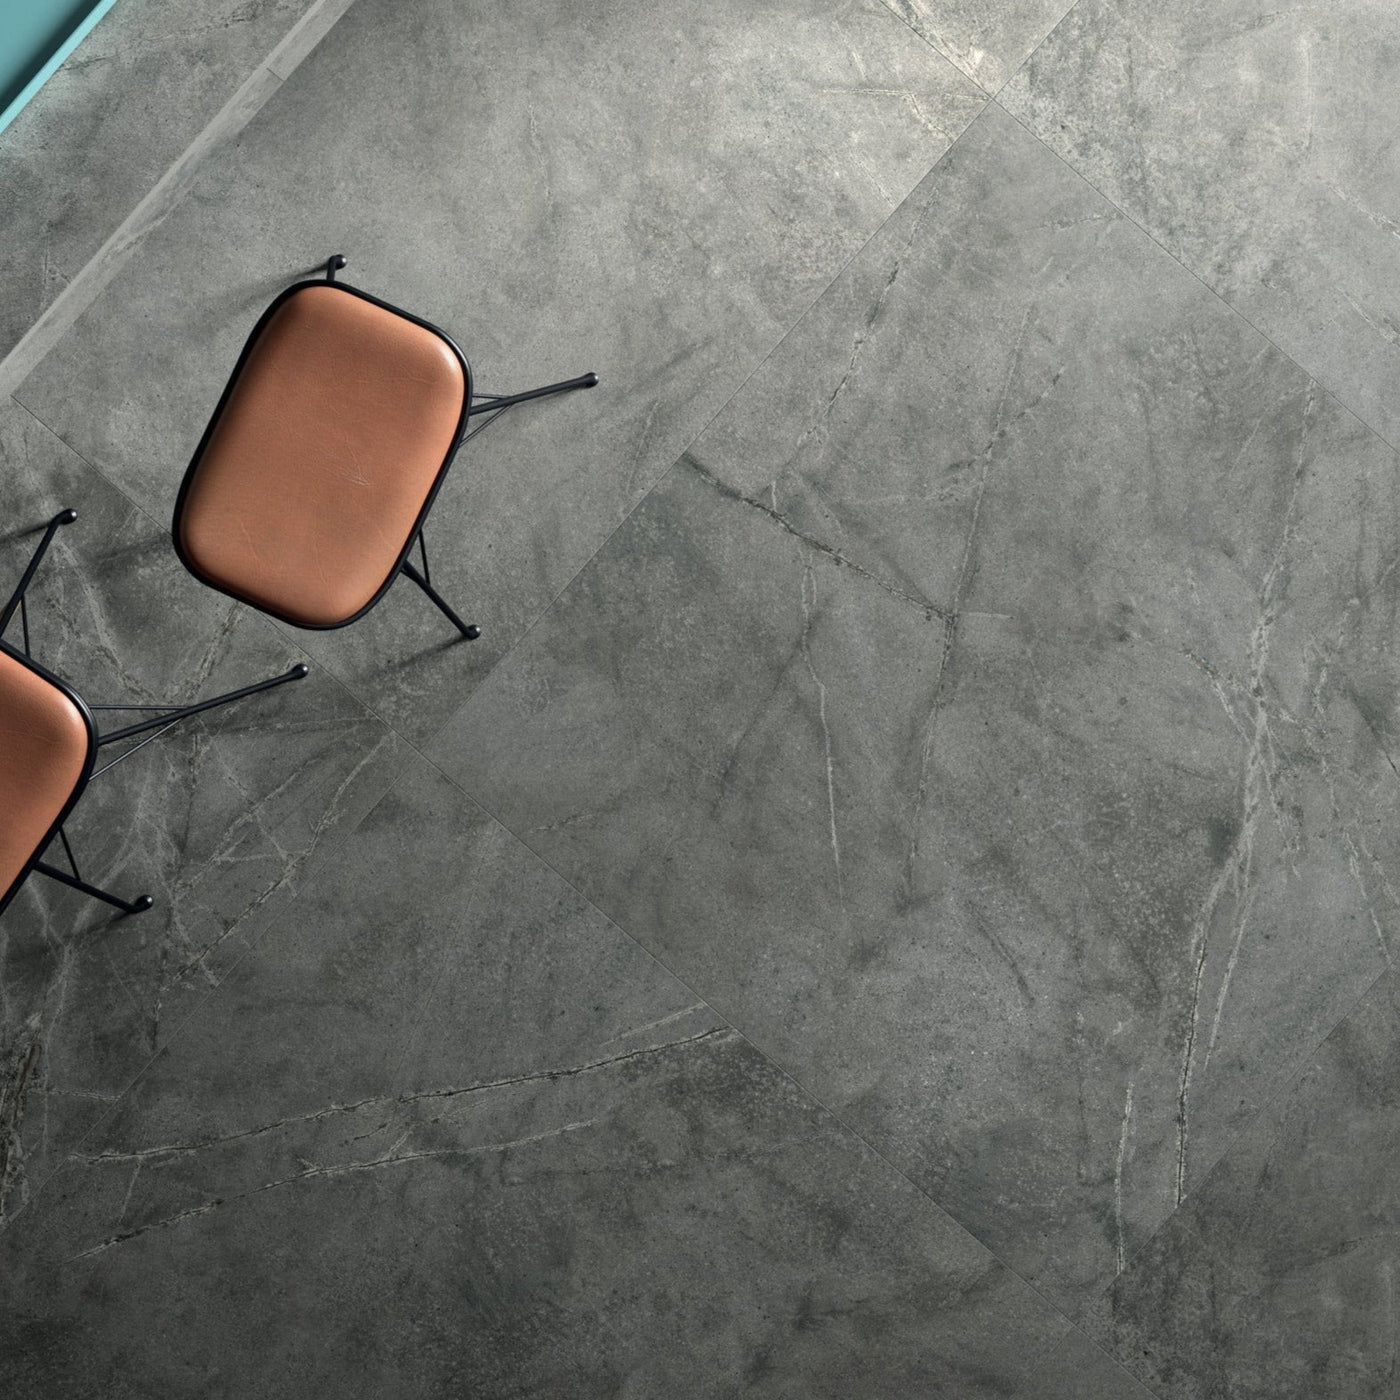 Premium Smoke Grey Tile - Captivating stone charm with detailed textures - Letta London - 